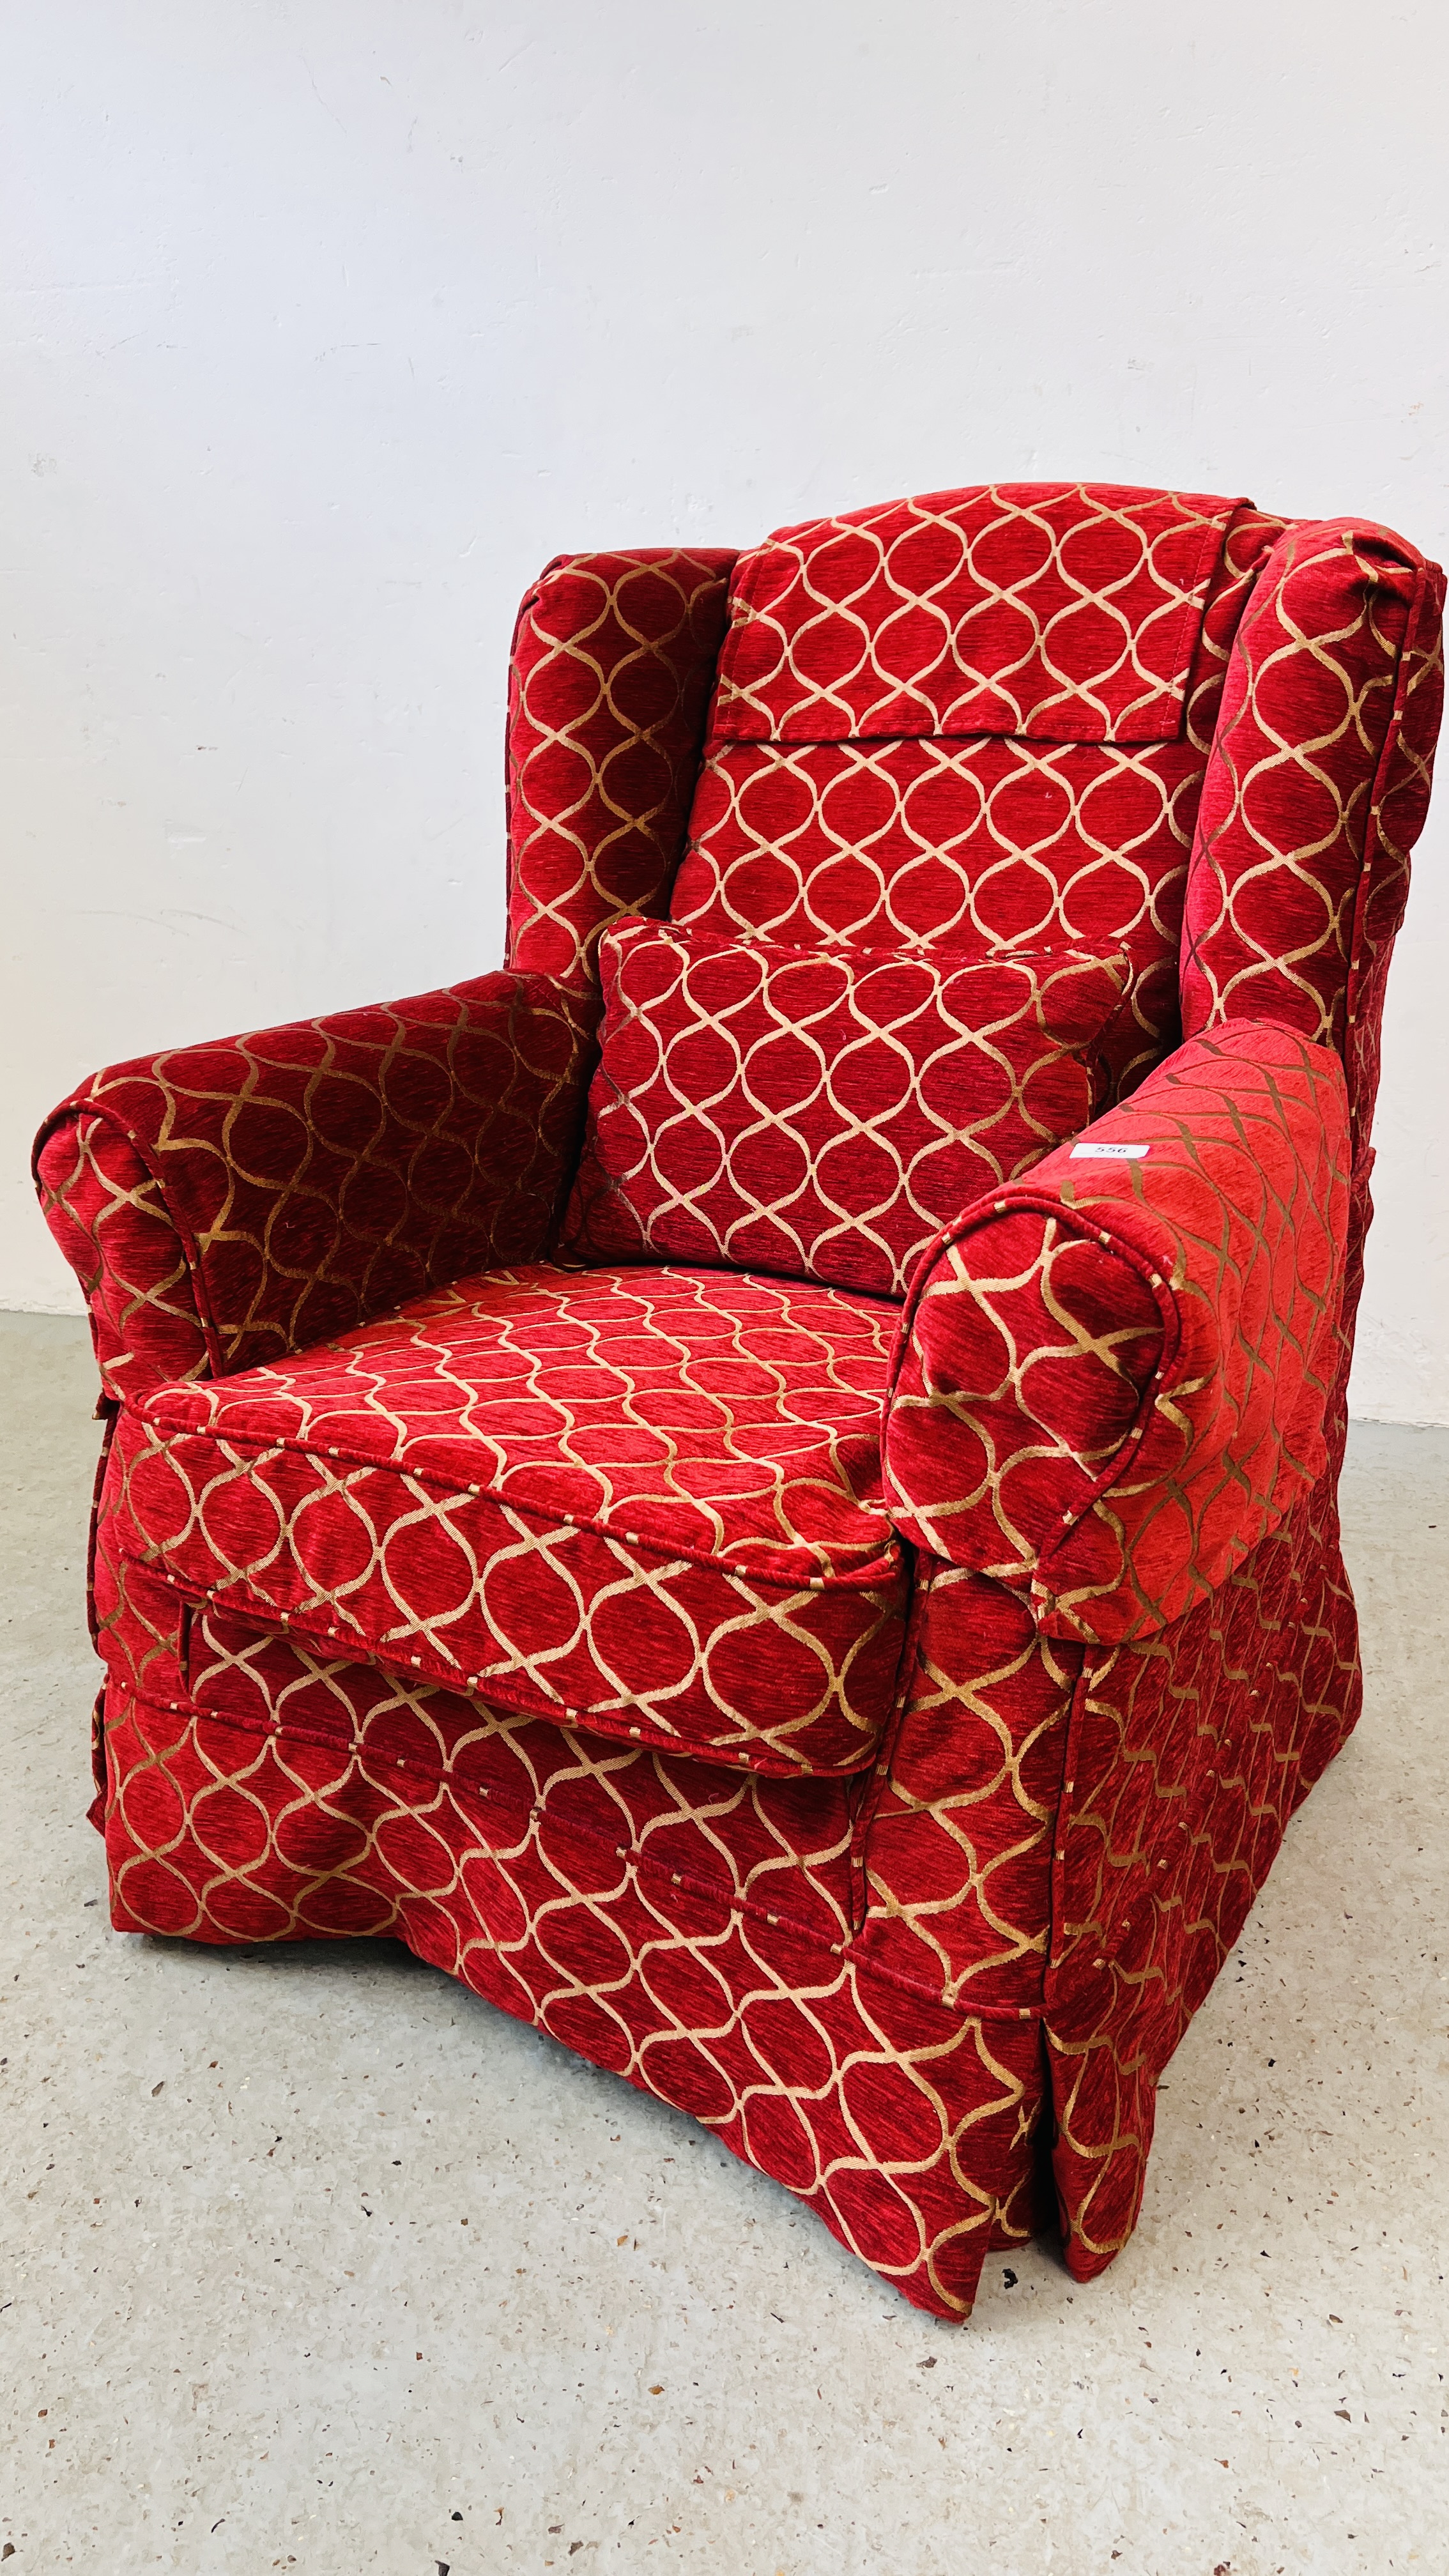 A MODERN WING BACK CHAIR UPHOLSTERED IN RED AND GOLD